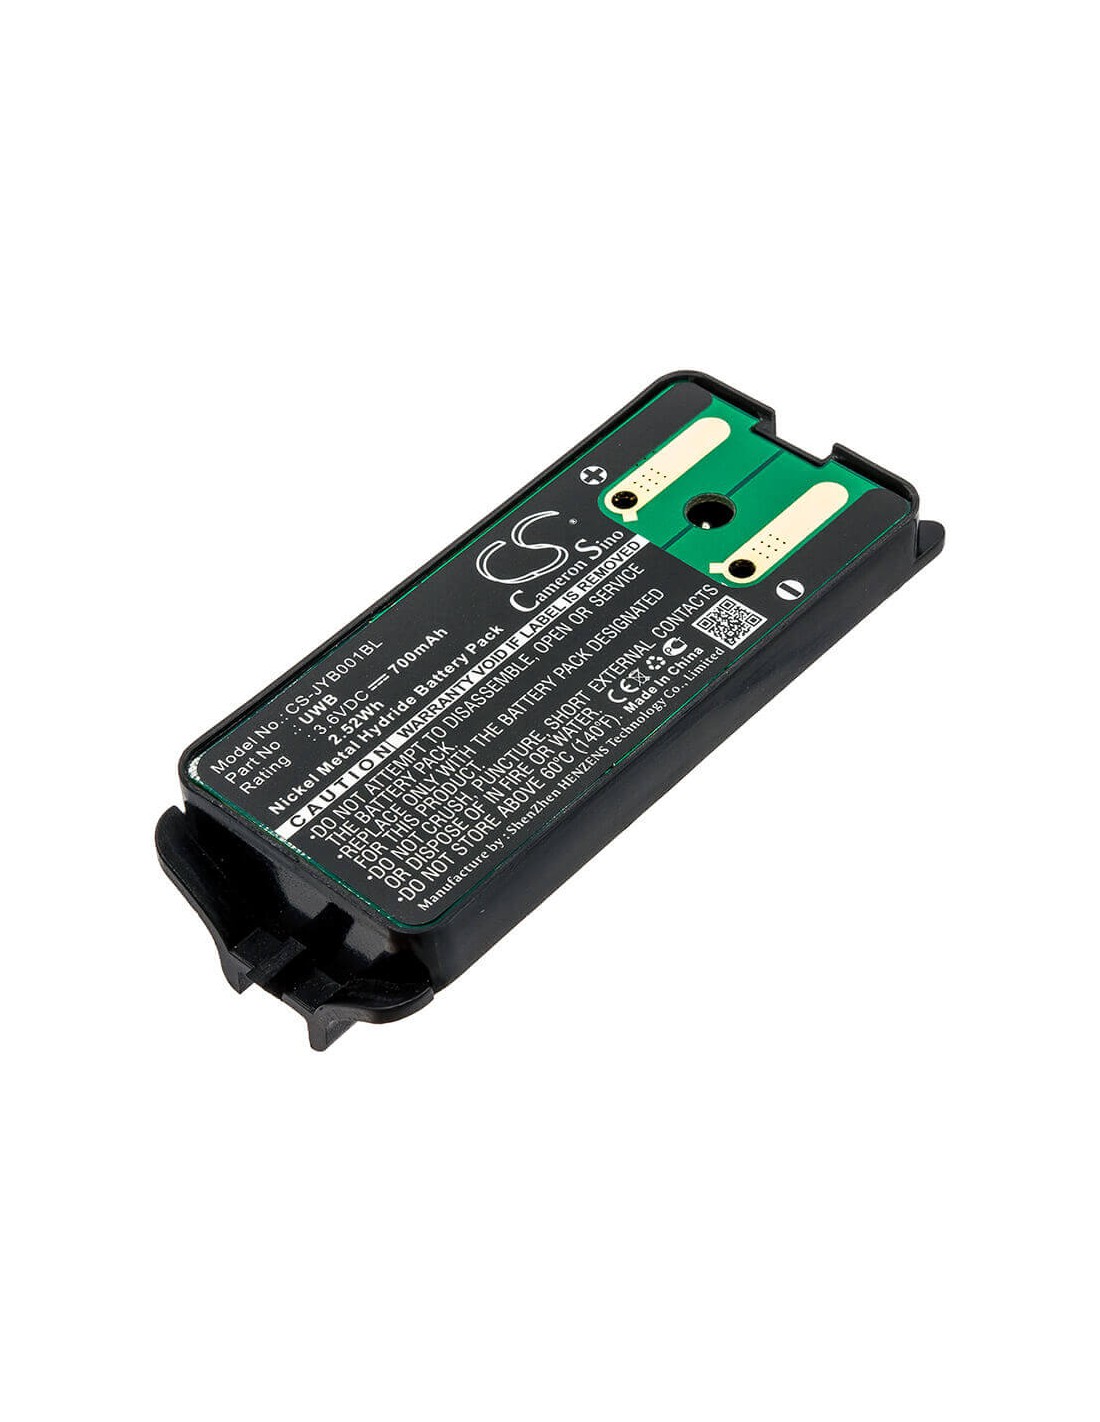 Battery for Jay, A001, Remote Control Ecu 3.6V, 700mAh - 2.52Wh